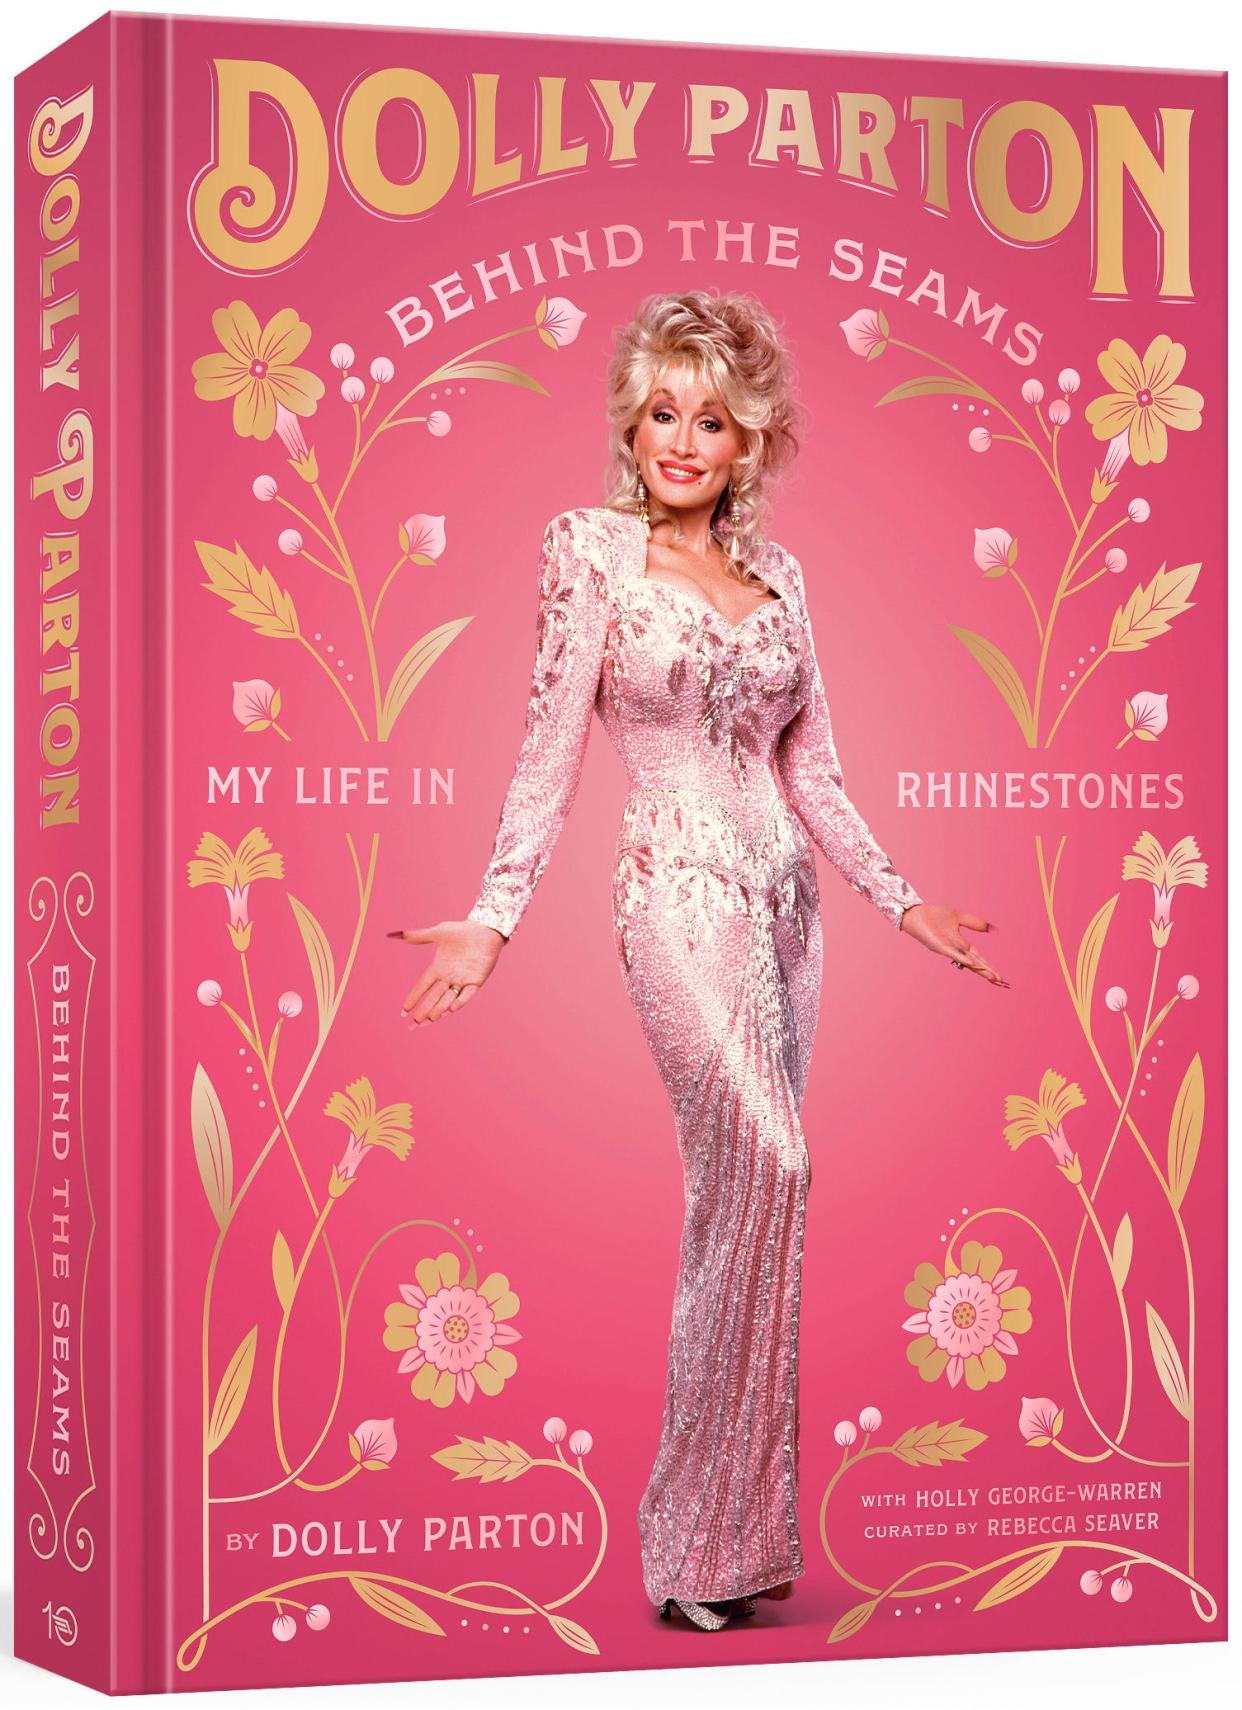 The cover of Dolly Parton's memoir "Behind the Seams: My Life in Rhinestones."